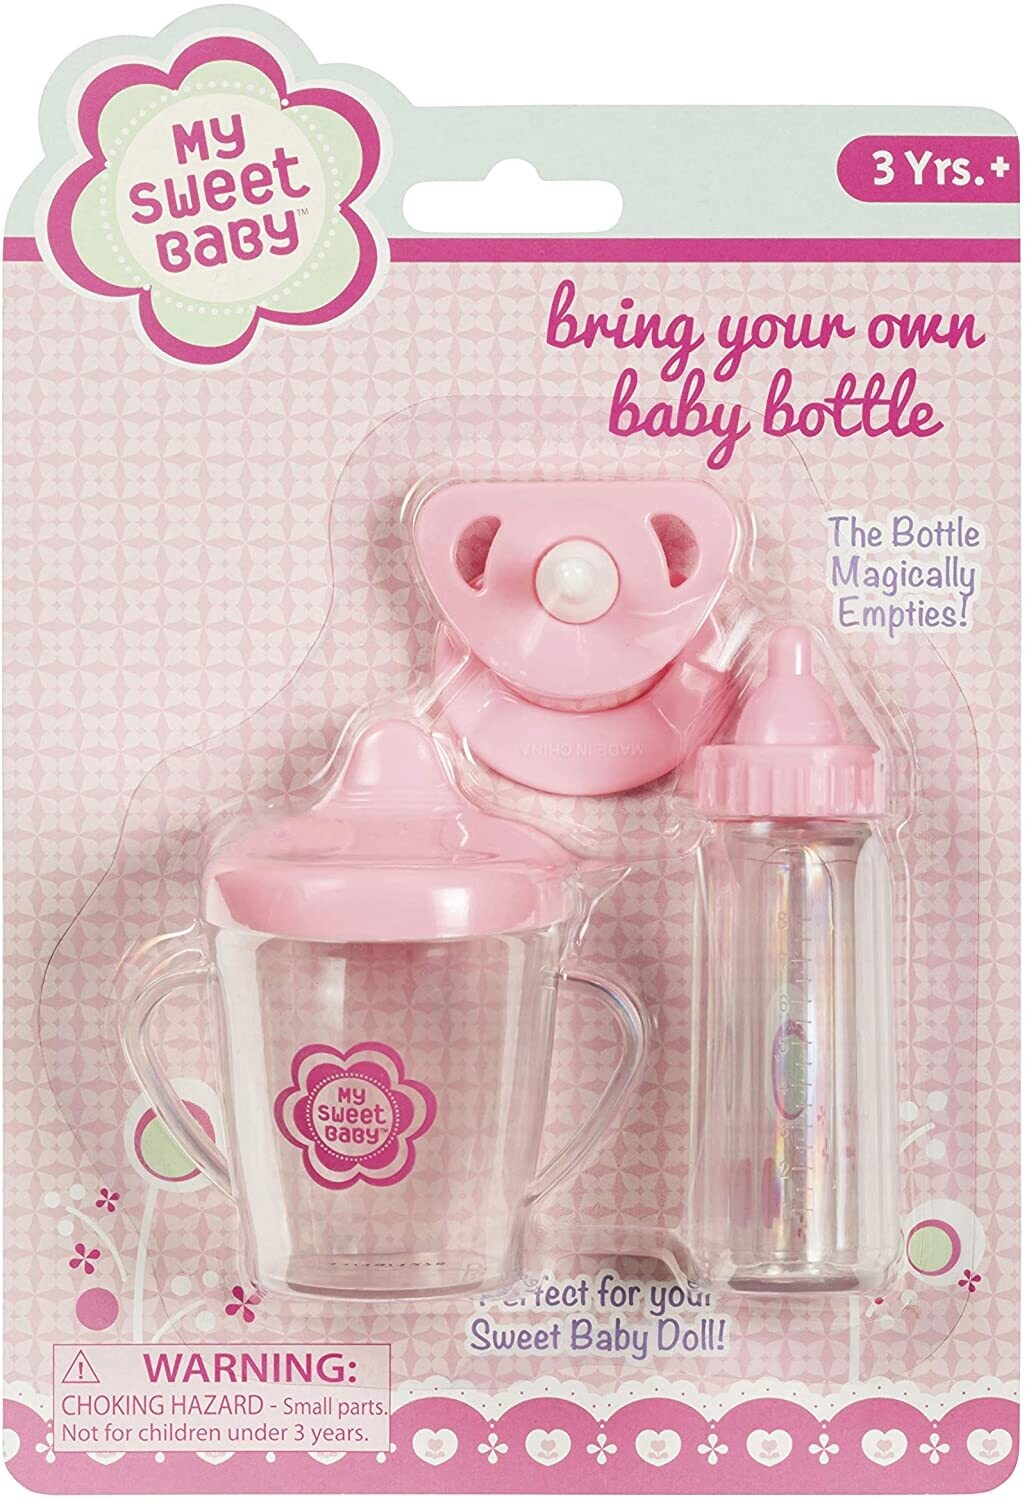 Bring Your Own Baby Bottle